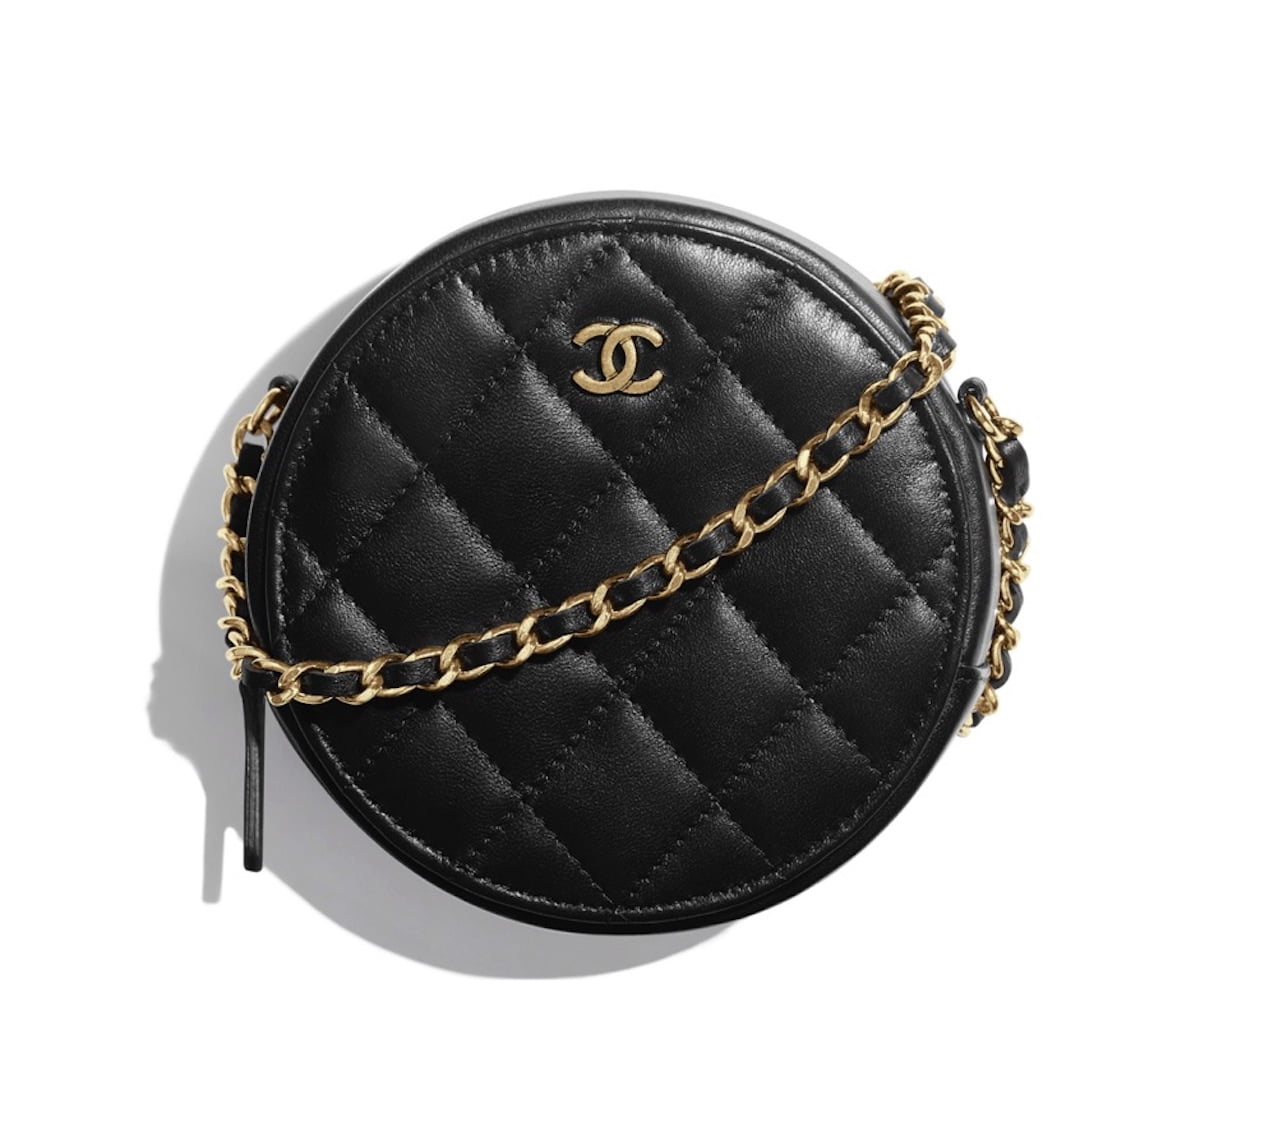 The New Chanel Round Clutch with Chain 